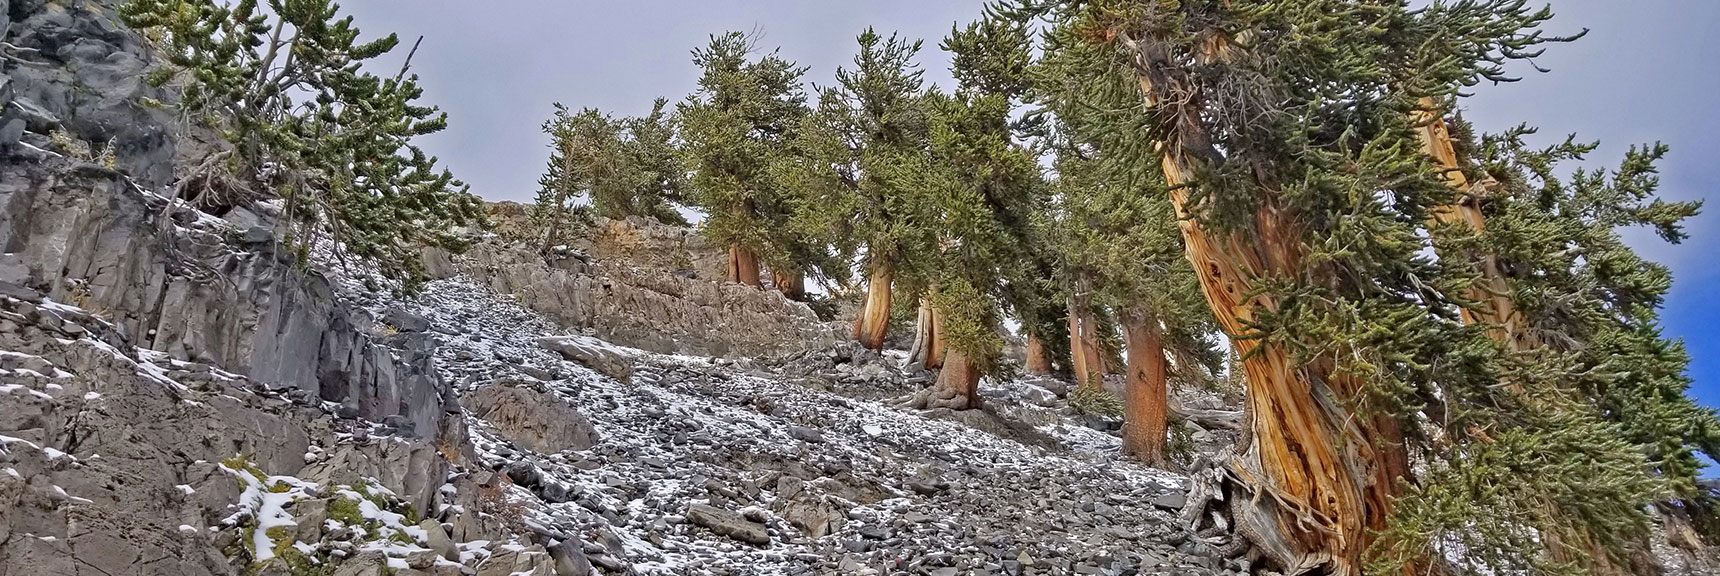 Bristlecone Pines Leaning Away From the Harsh Cold Winds | Charleston Peak Loop October Snow Dusting | Mt. Charleston Wilderness | Spring Mountains, Nevada